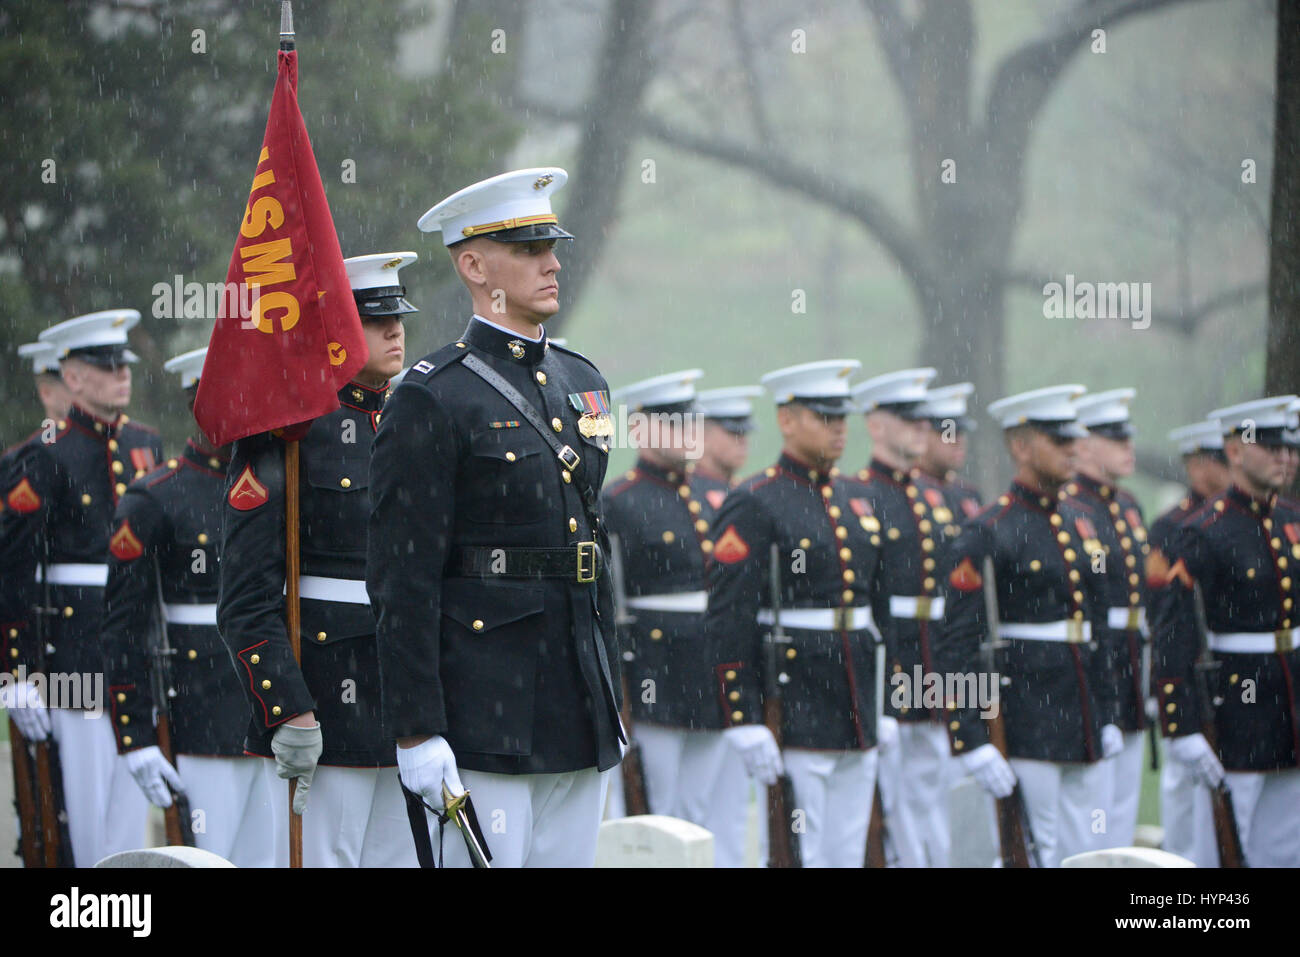 Arlington, Virginia, USA. 6th Apr, 2017. Marine Corps honor guard stand at attention during the gravesite funeral services for John Glenn at Arlington National Cemetery April 6, 2017 in Arlington, Virginia. Glenn, the first American astronaut to orbit the Earth and later a United States senator, died at the age of 95 on December 8, 2016. Credit: Planetpix/Alamy Live News Stock Photo